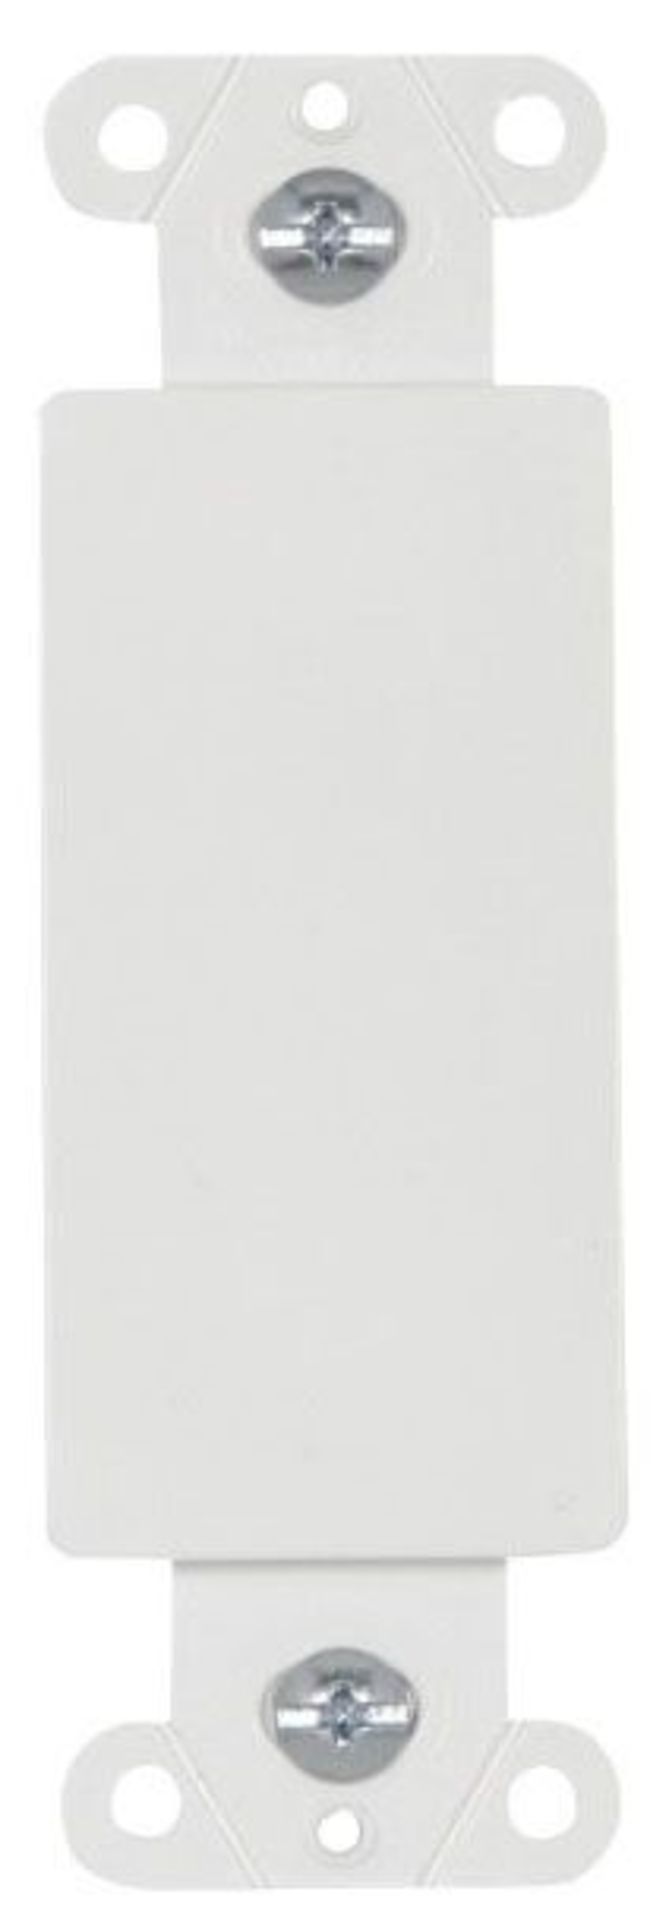 1x Eaton 2160W-F-LW Wallplates and Accessories Blank Insert White EA